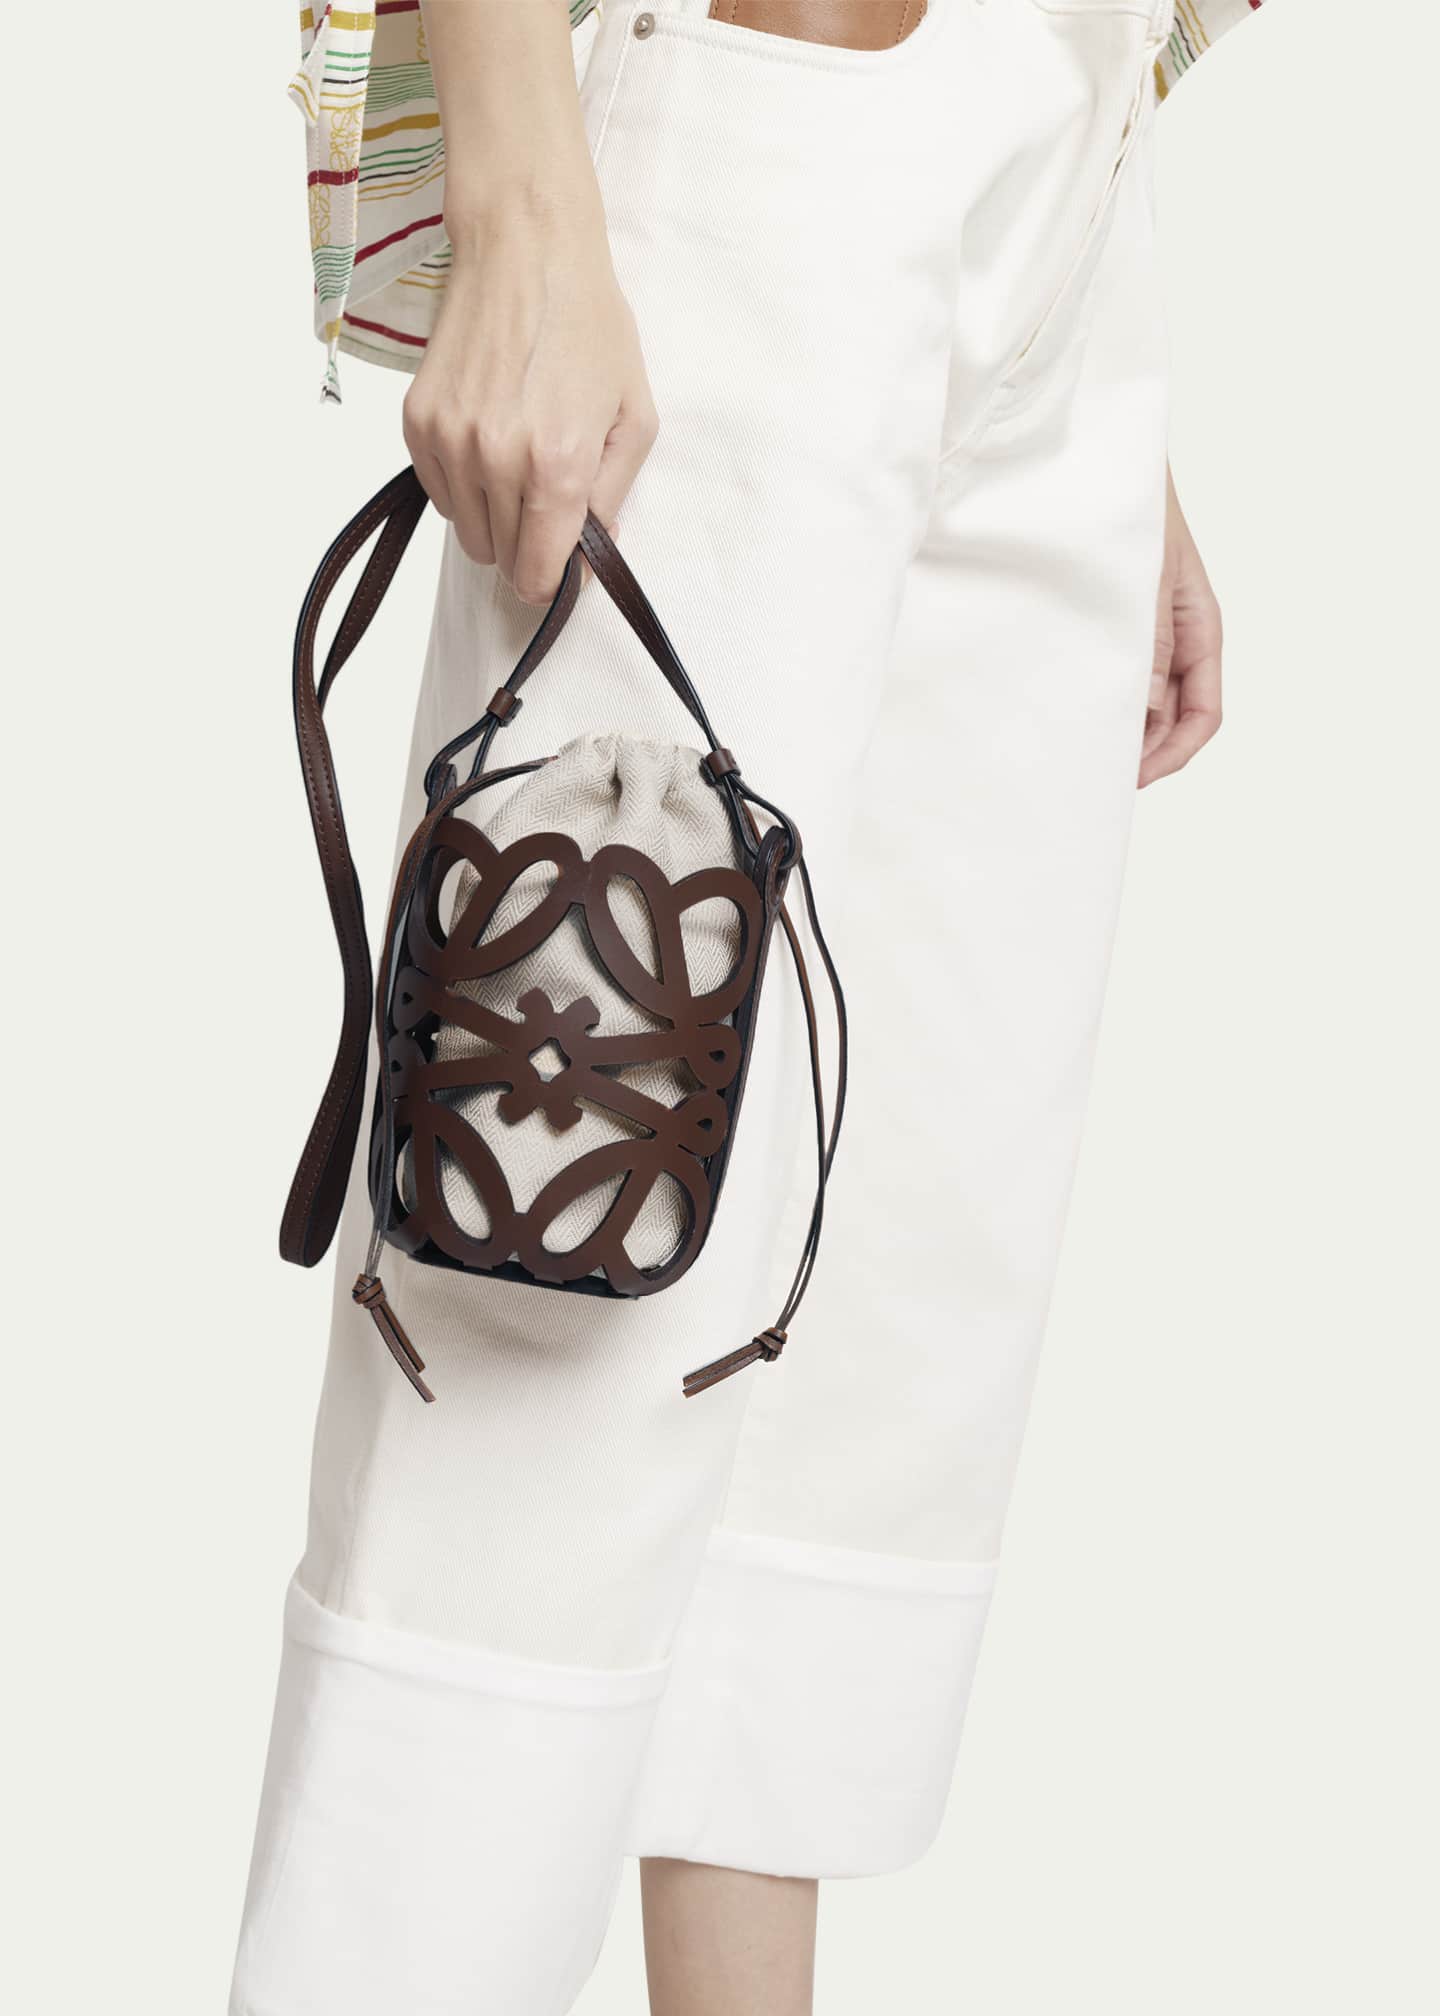 LOEWE Leather Anagram Cut-Out Cross-Body Bag